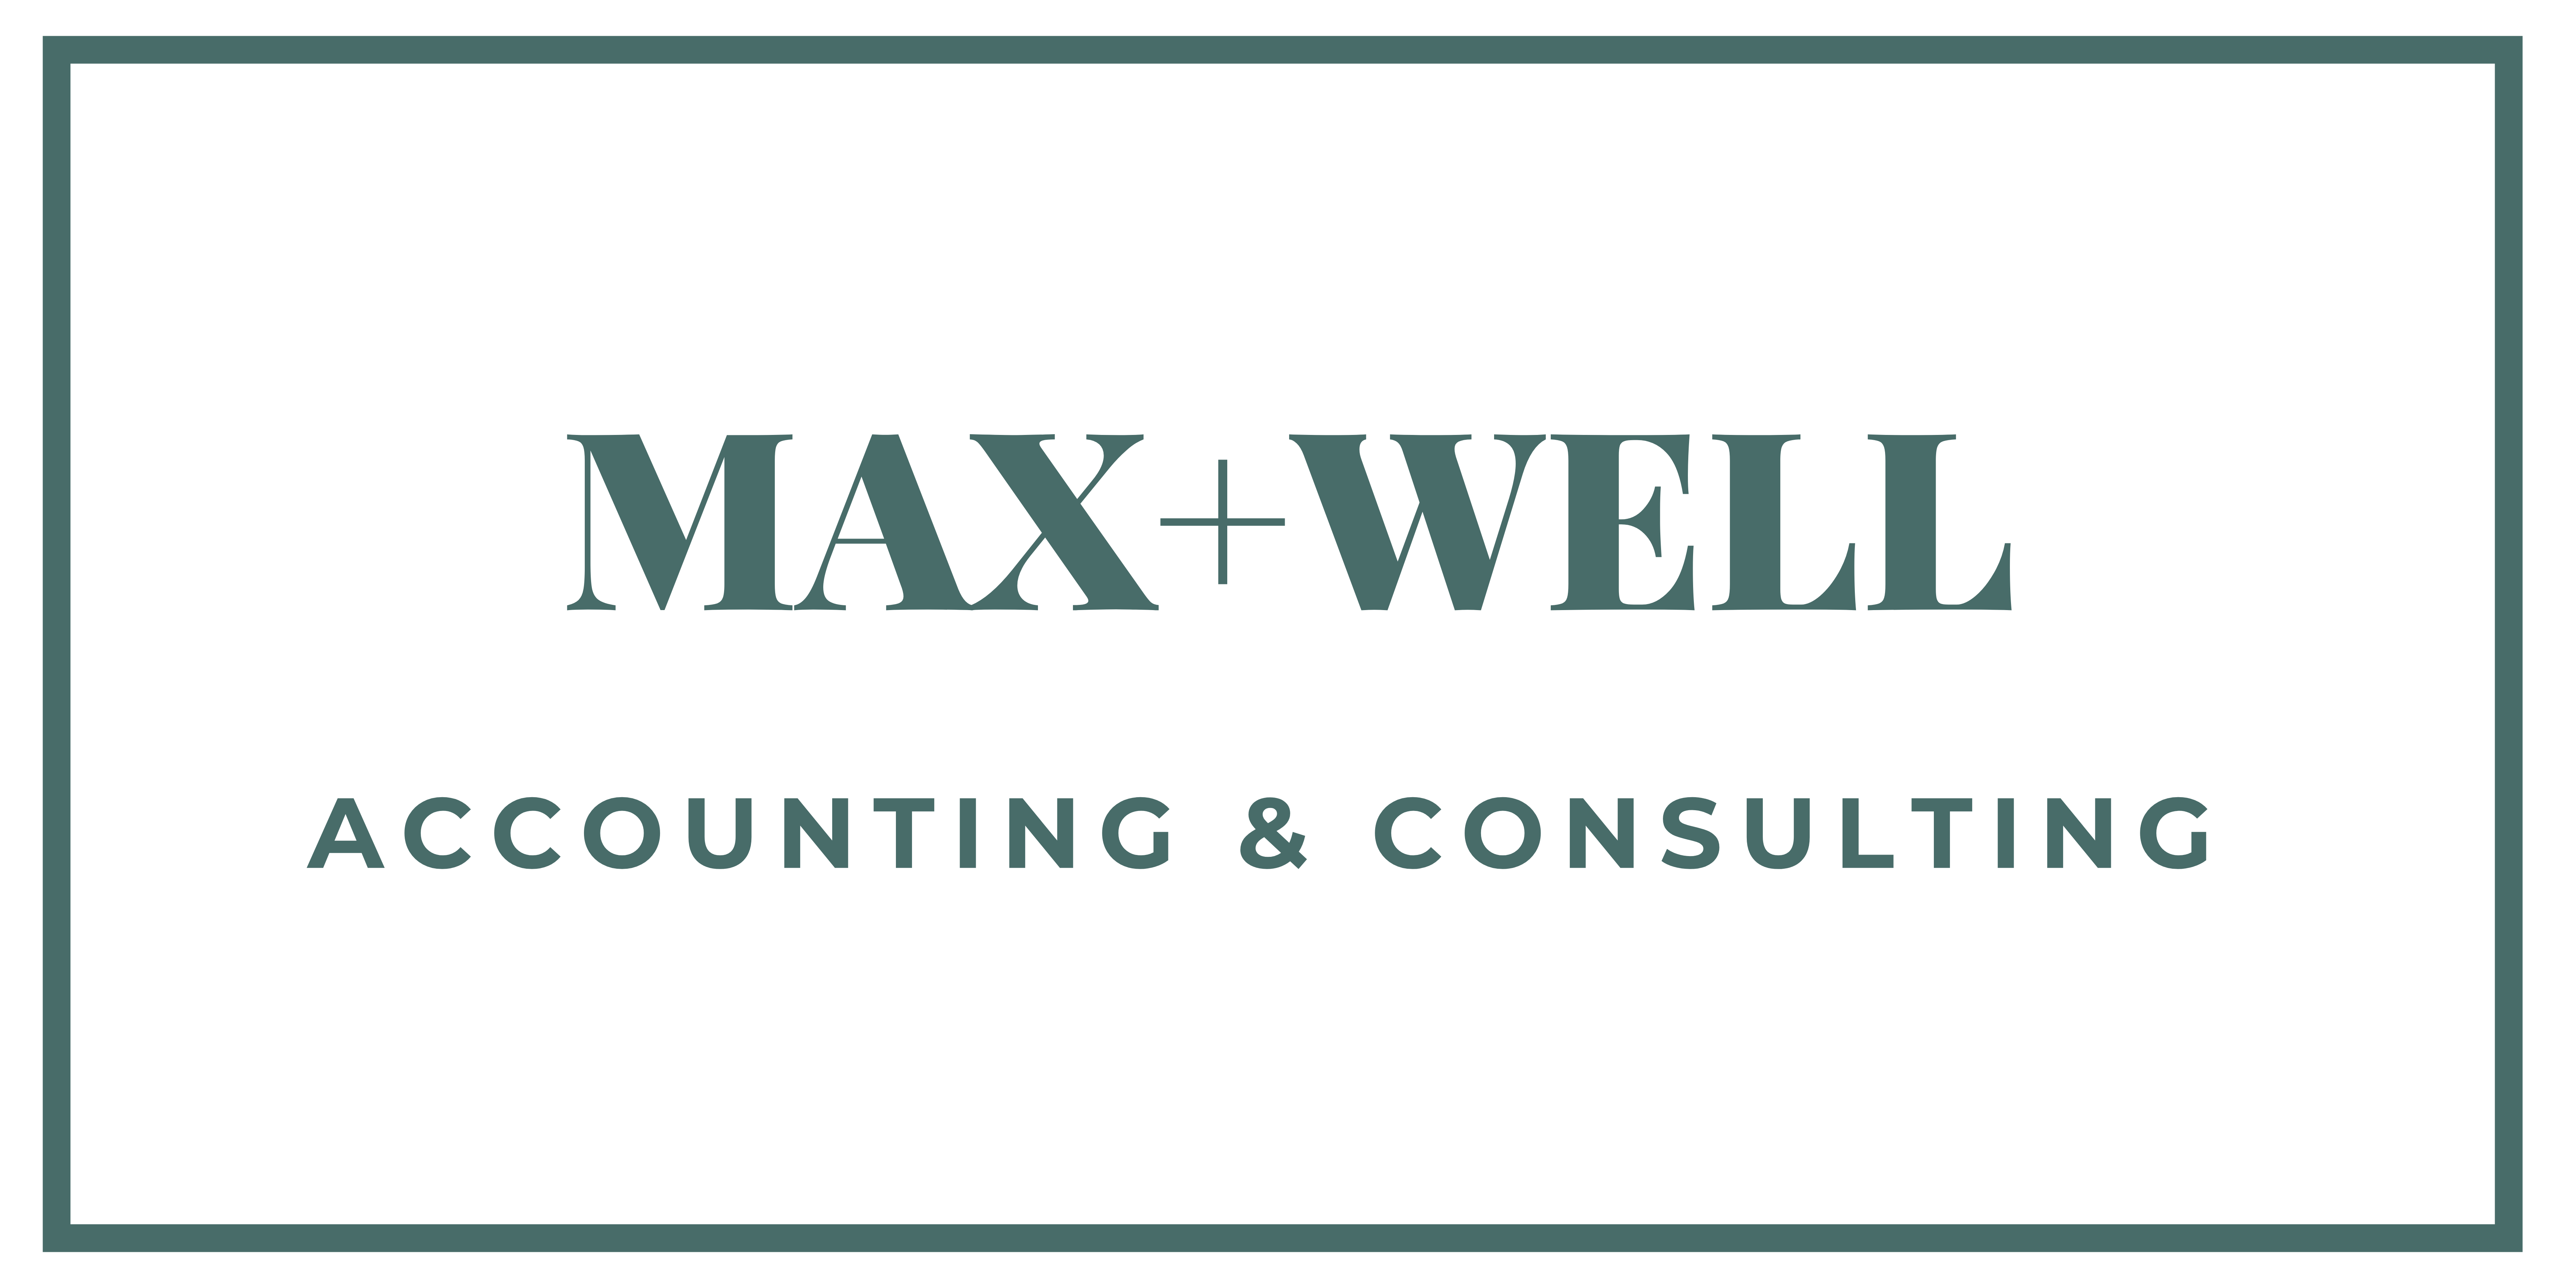 Logo Banner for Maxwell Accounting & Consulting in Kansas City, MO